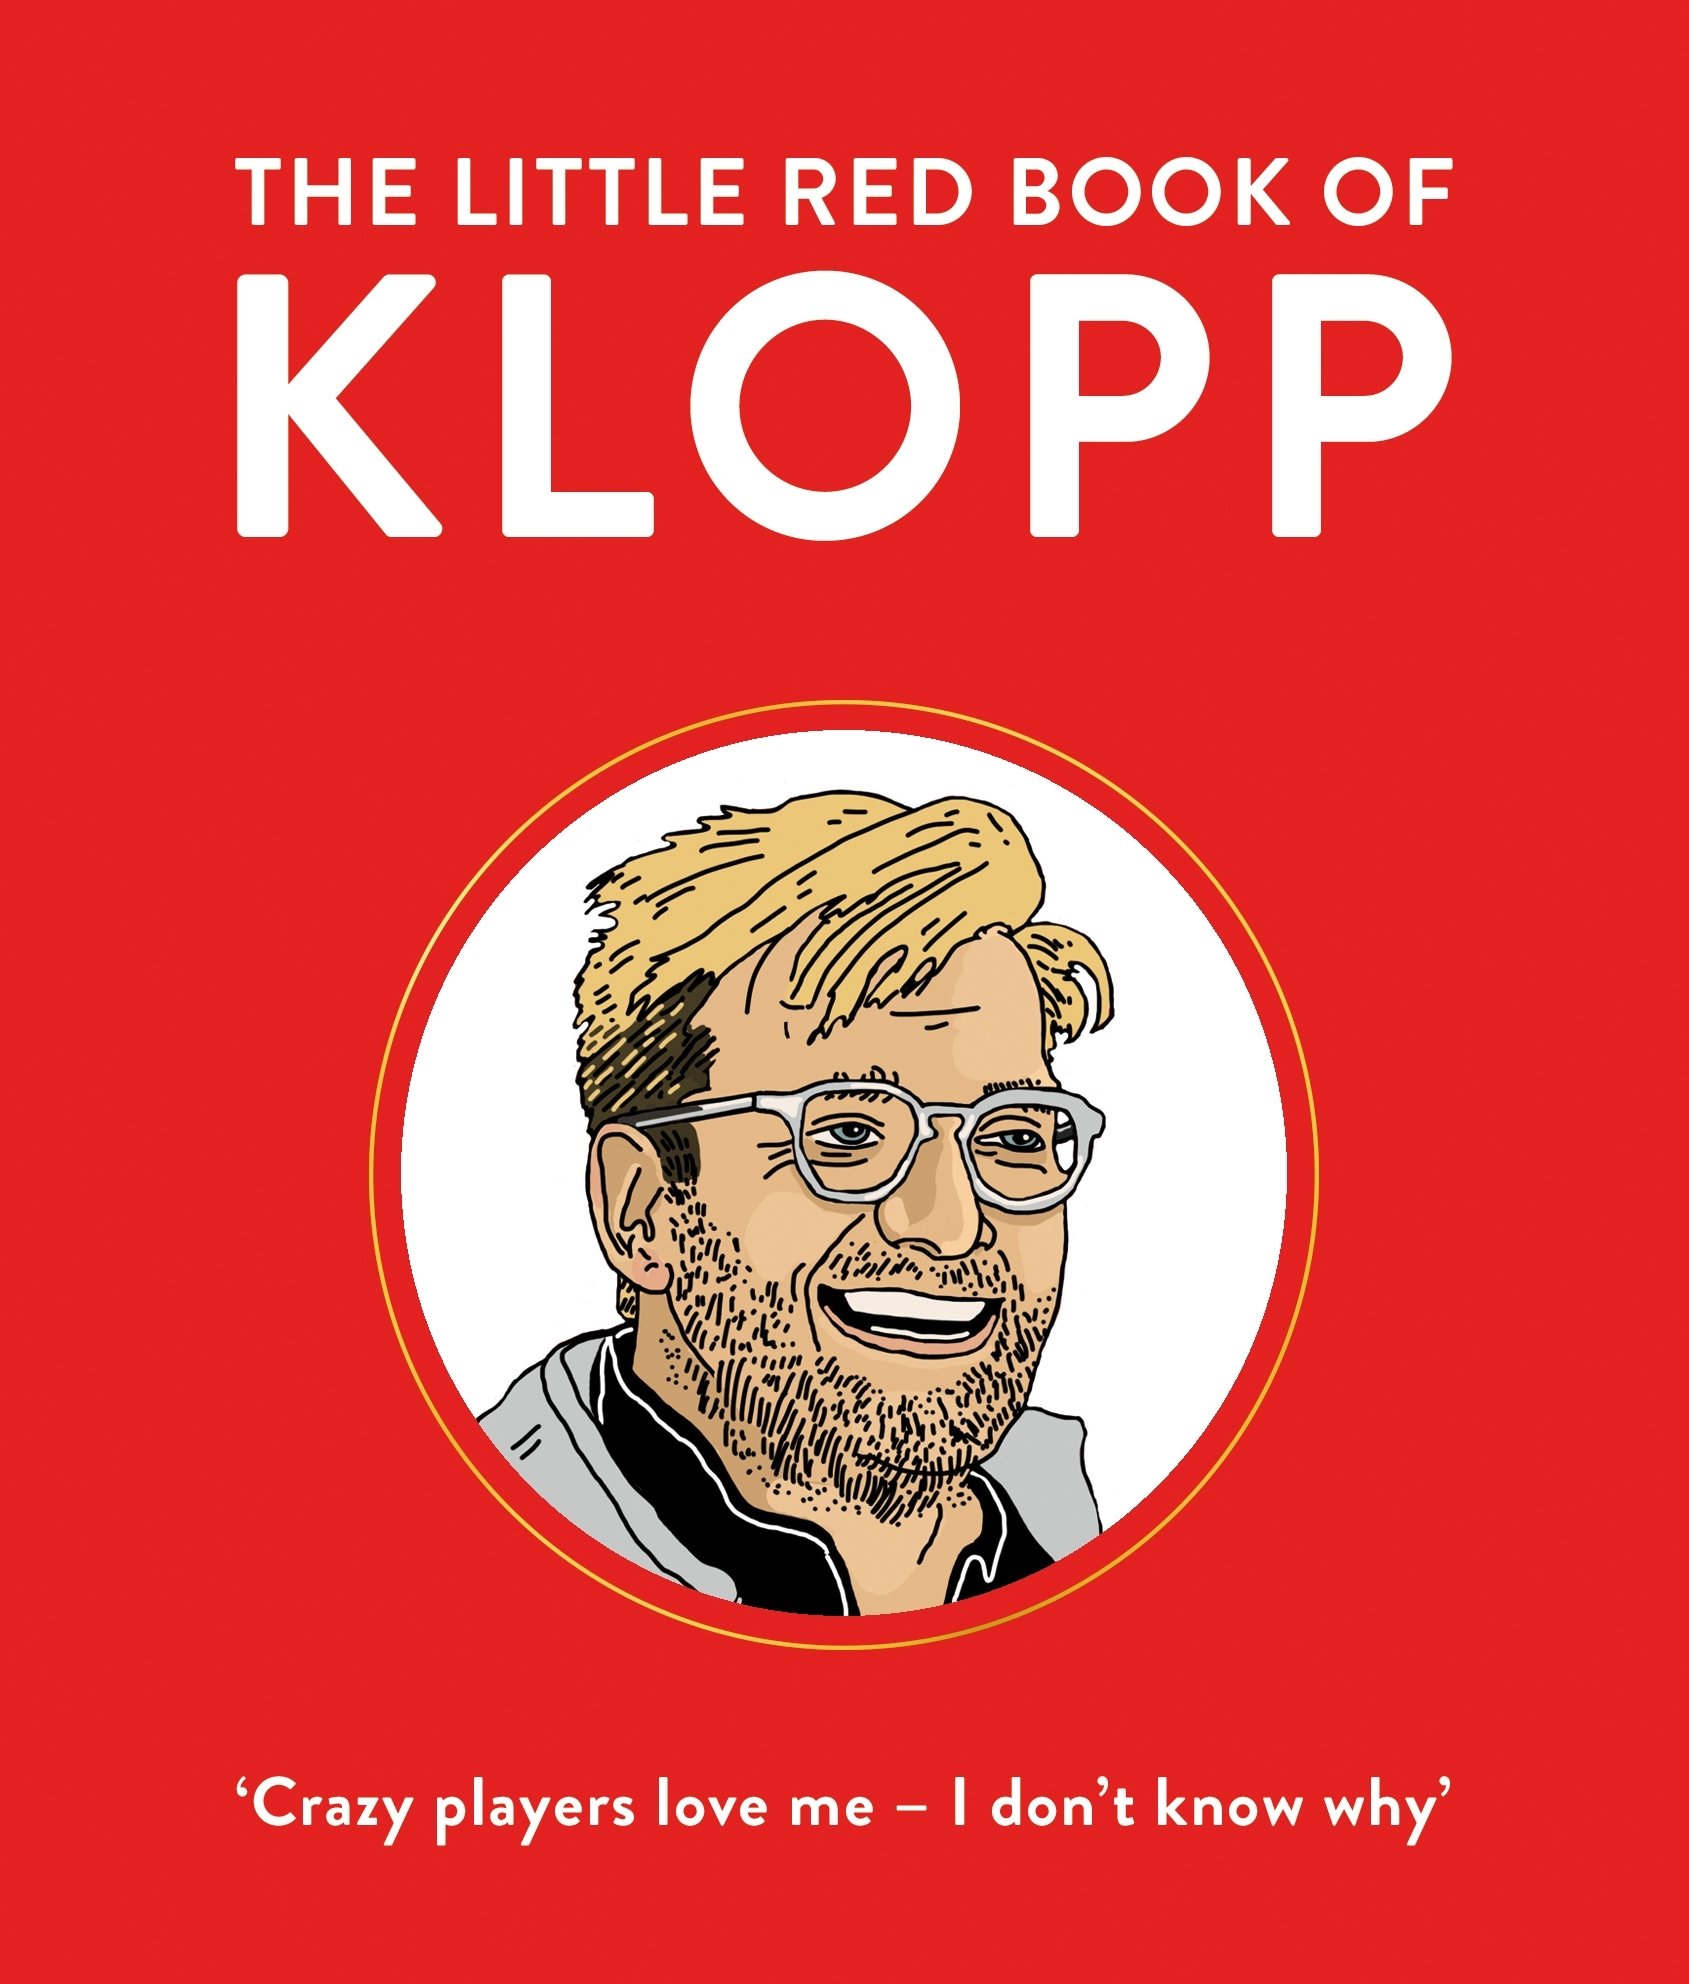 The Little Red Book of Klopp for COVID-19